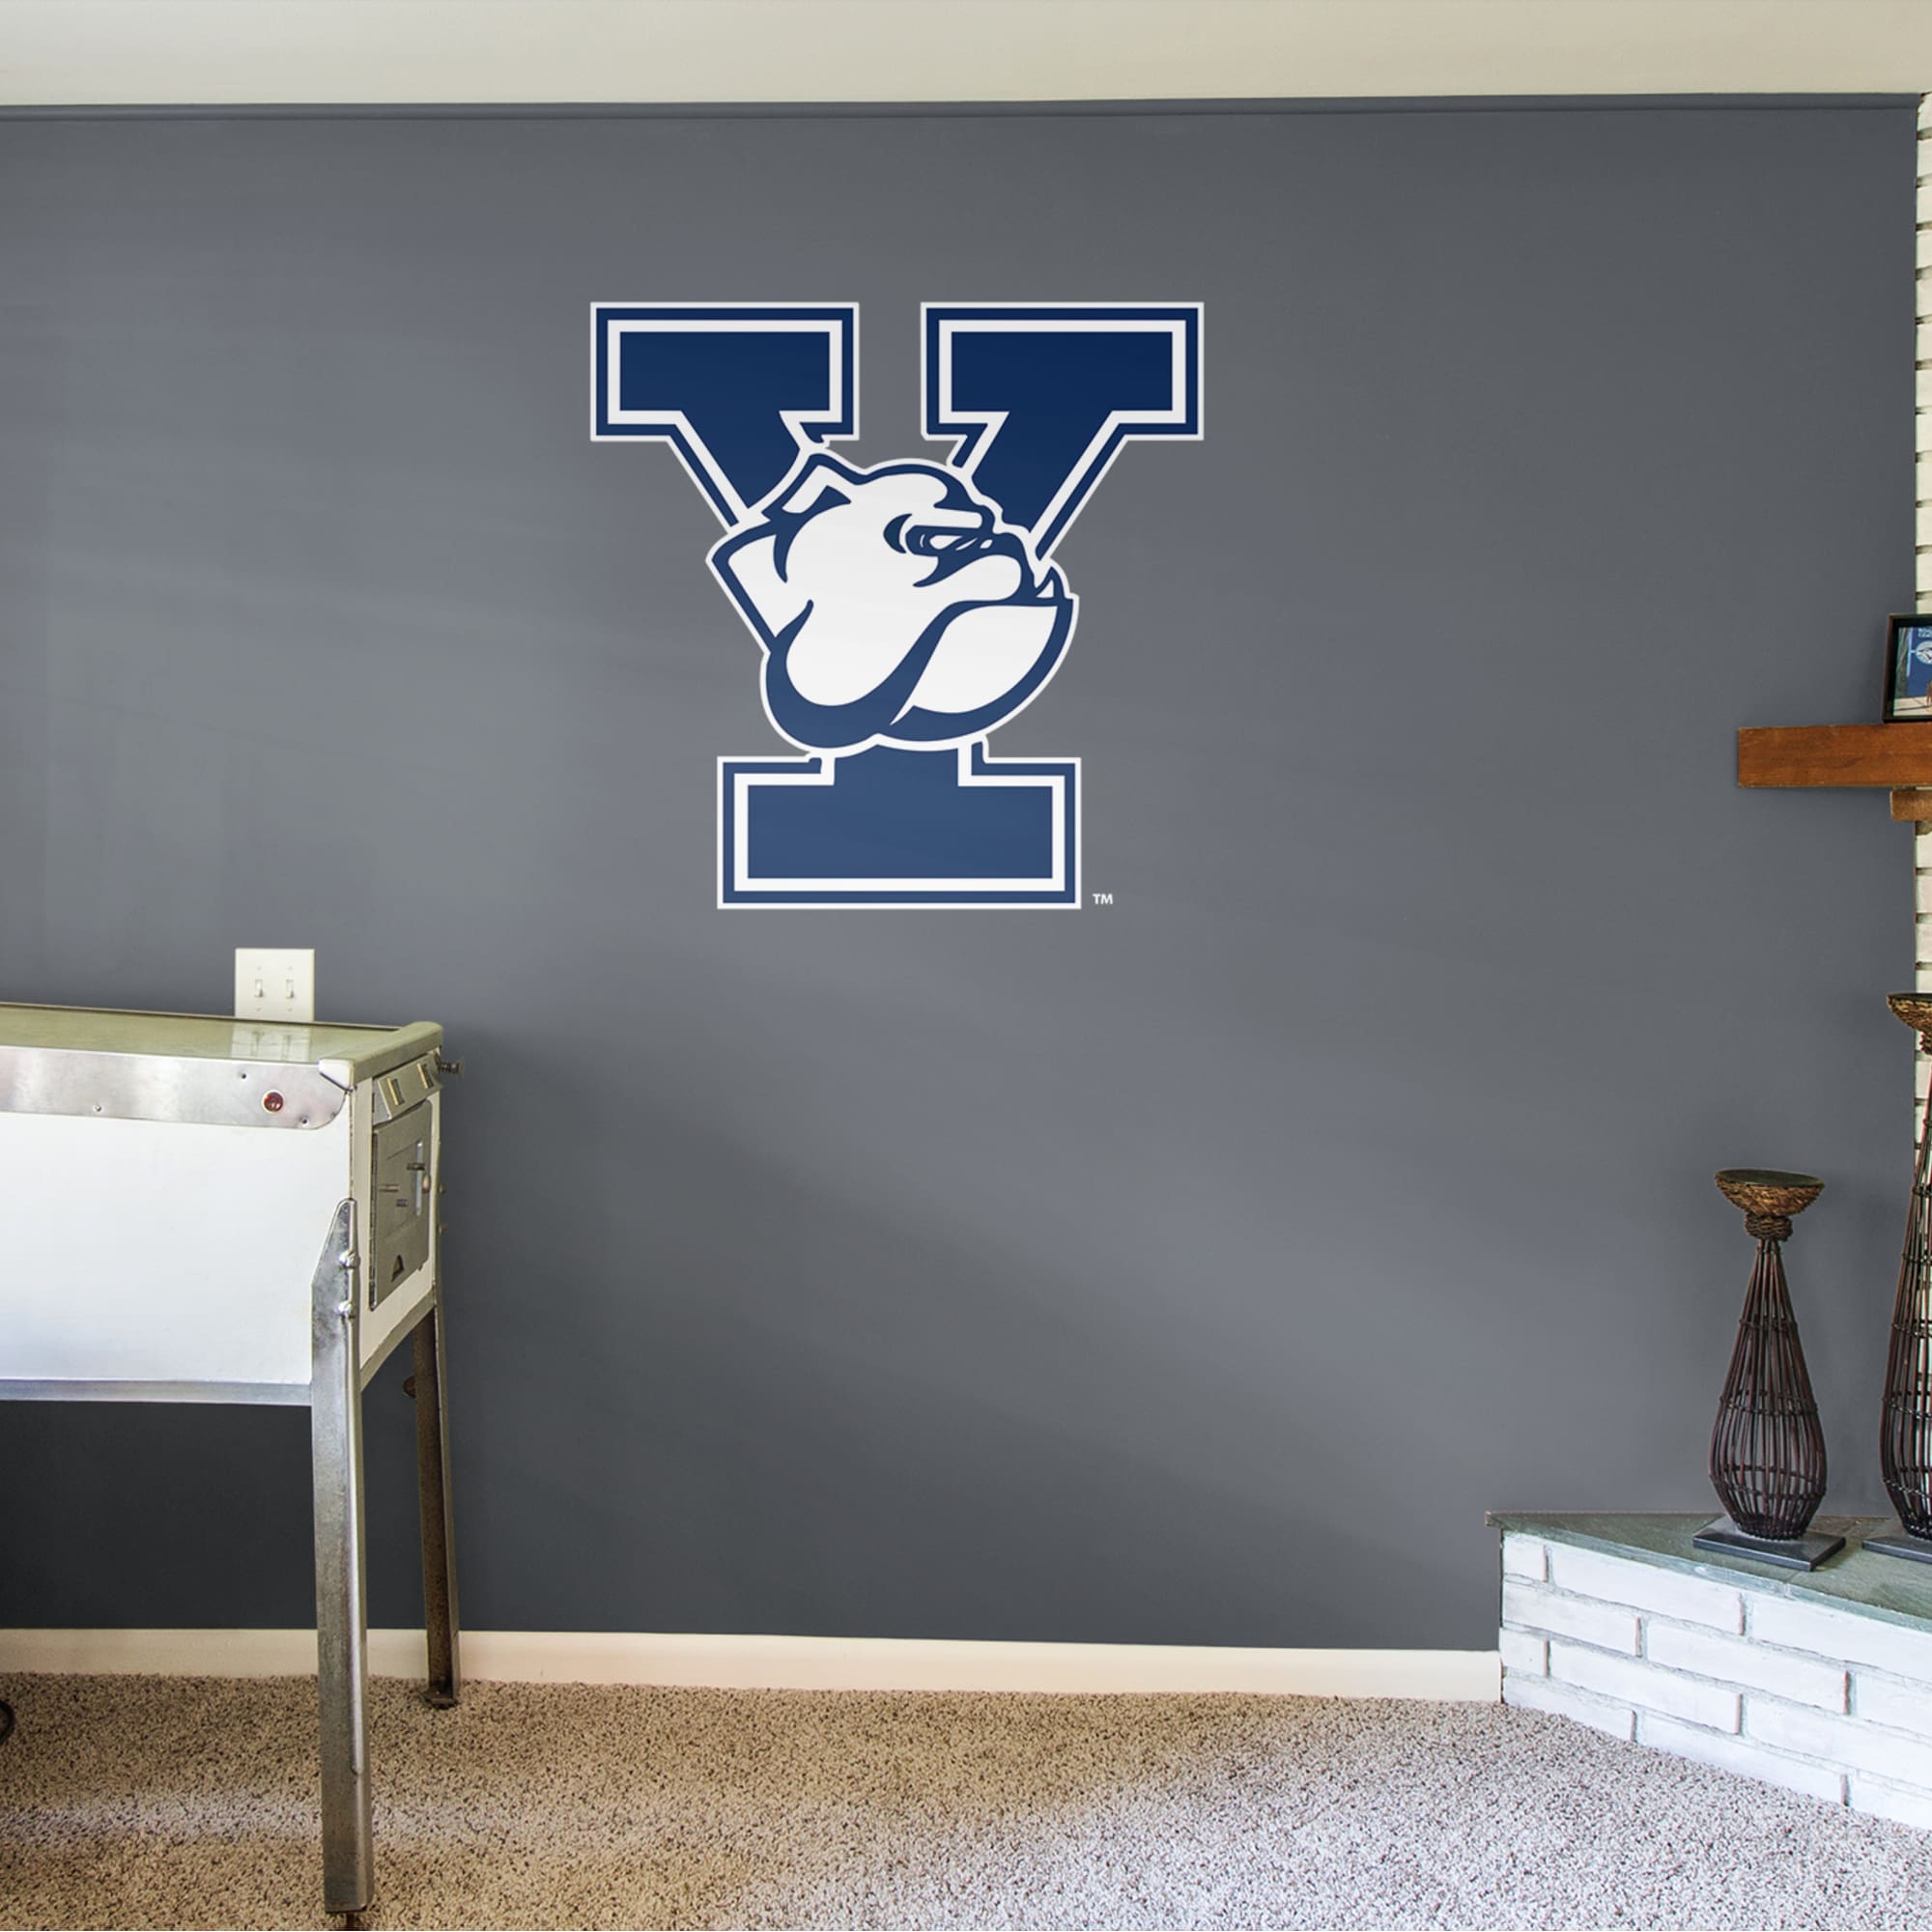 Yale Bulldogs: Logo - Officially Licensed Removable Wall Decal 39.0"W x 38.5"H by Fathead | Vinyl